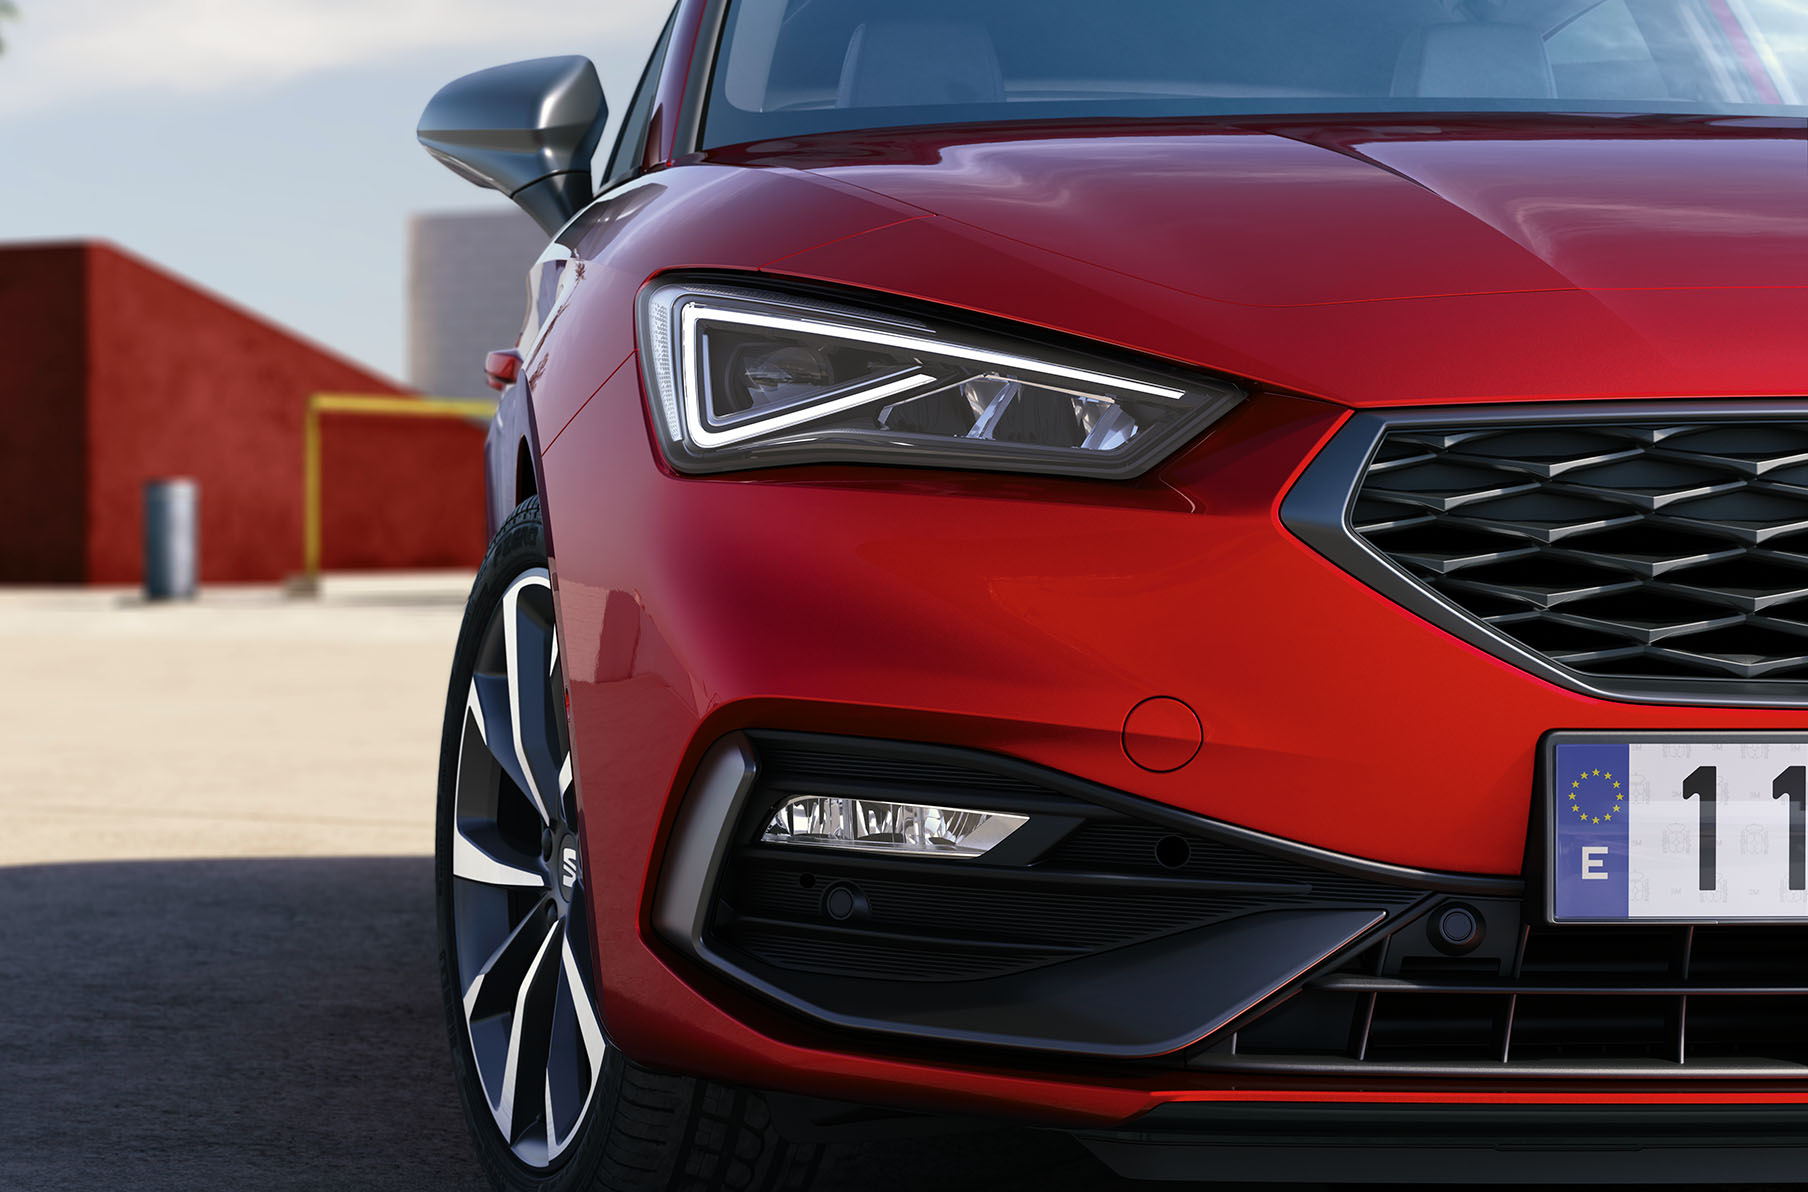  seat leon desire red colour with full led dynamic headlights